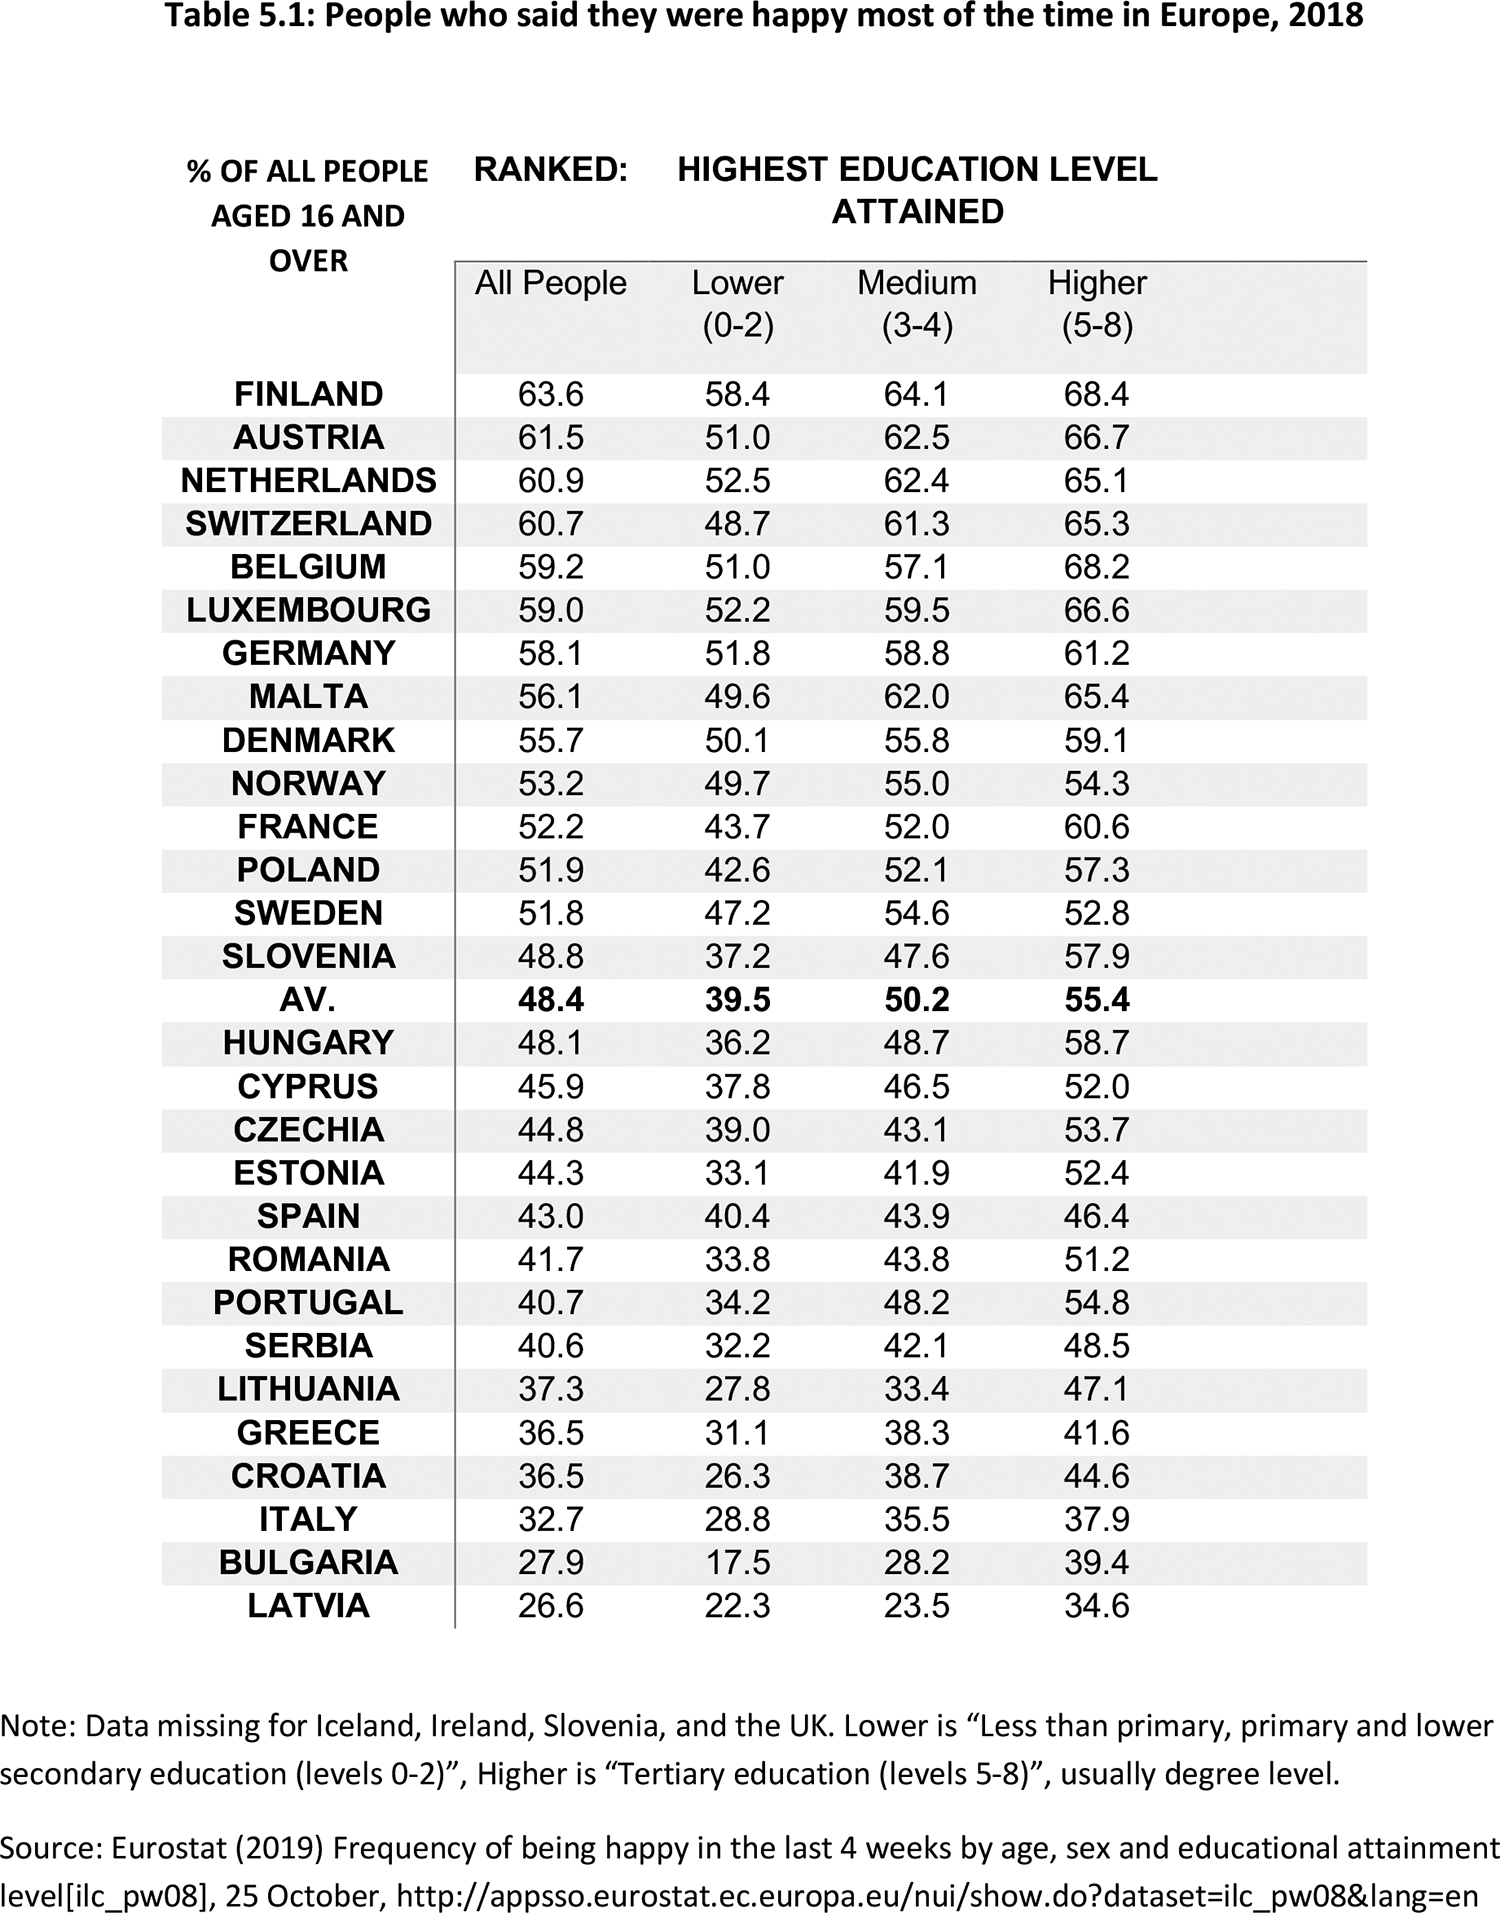 Table 5.1: Note: Data missing for Iceland, Ireland, Slovenia, and the UK. Lower is “Less than primary, primary and lower secondary education (levels 0-2)”, Higher is “Tertiary education (levels 5-8)”, usually degree level.
Source: Eurostat (2019) Frequency of being happy in the last 4 weeks by age, sex and educational attainment level[ilc_pw08], 25 October, http://appsso.eurostat.ec.europa.eu/nui/show.do?dataset=ilc_pw08&lang=en